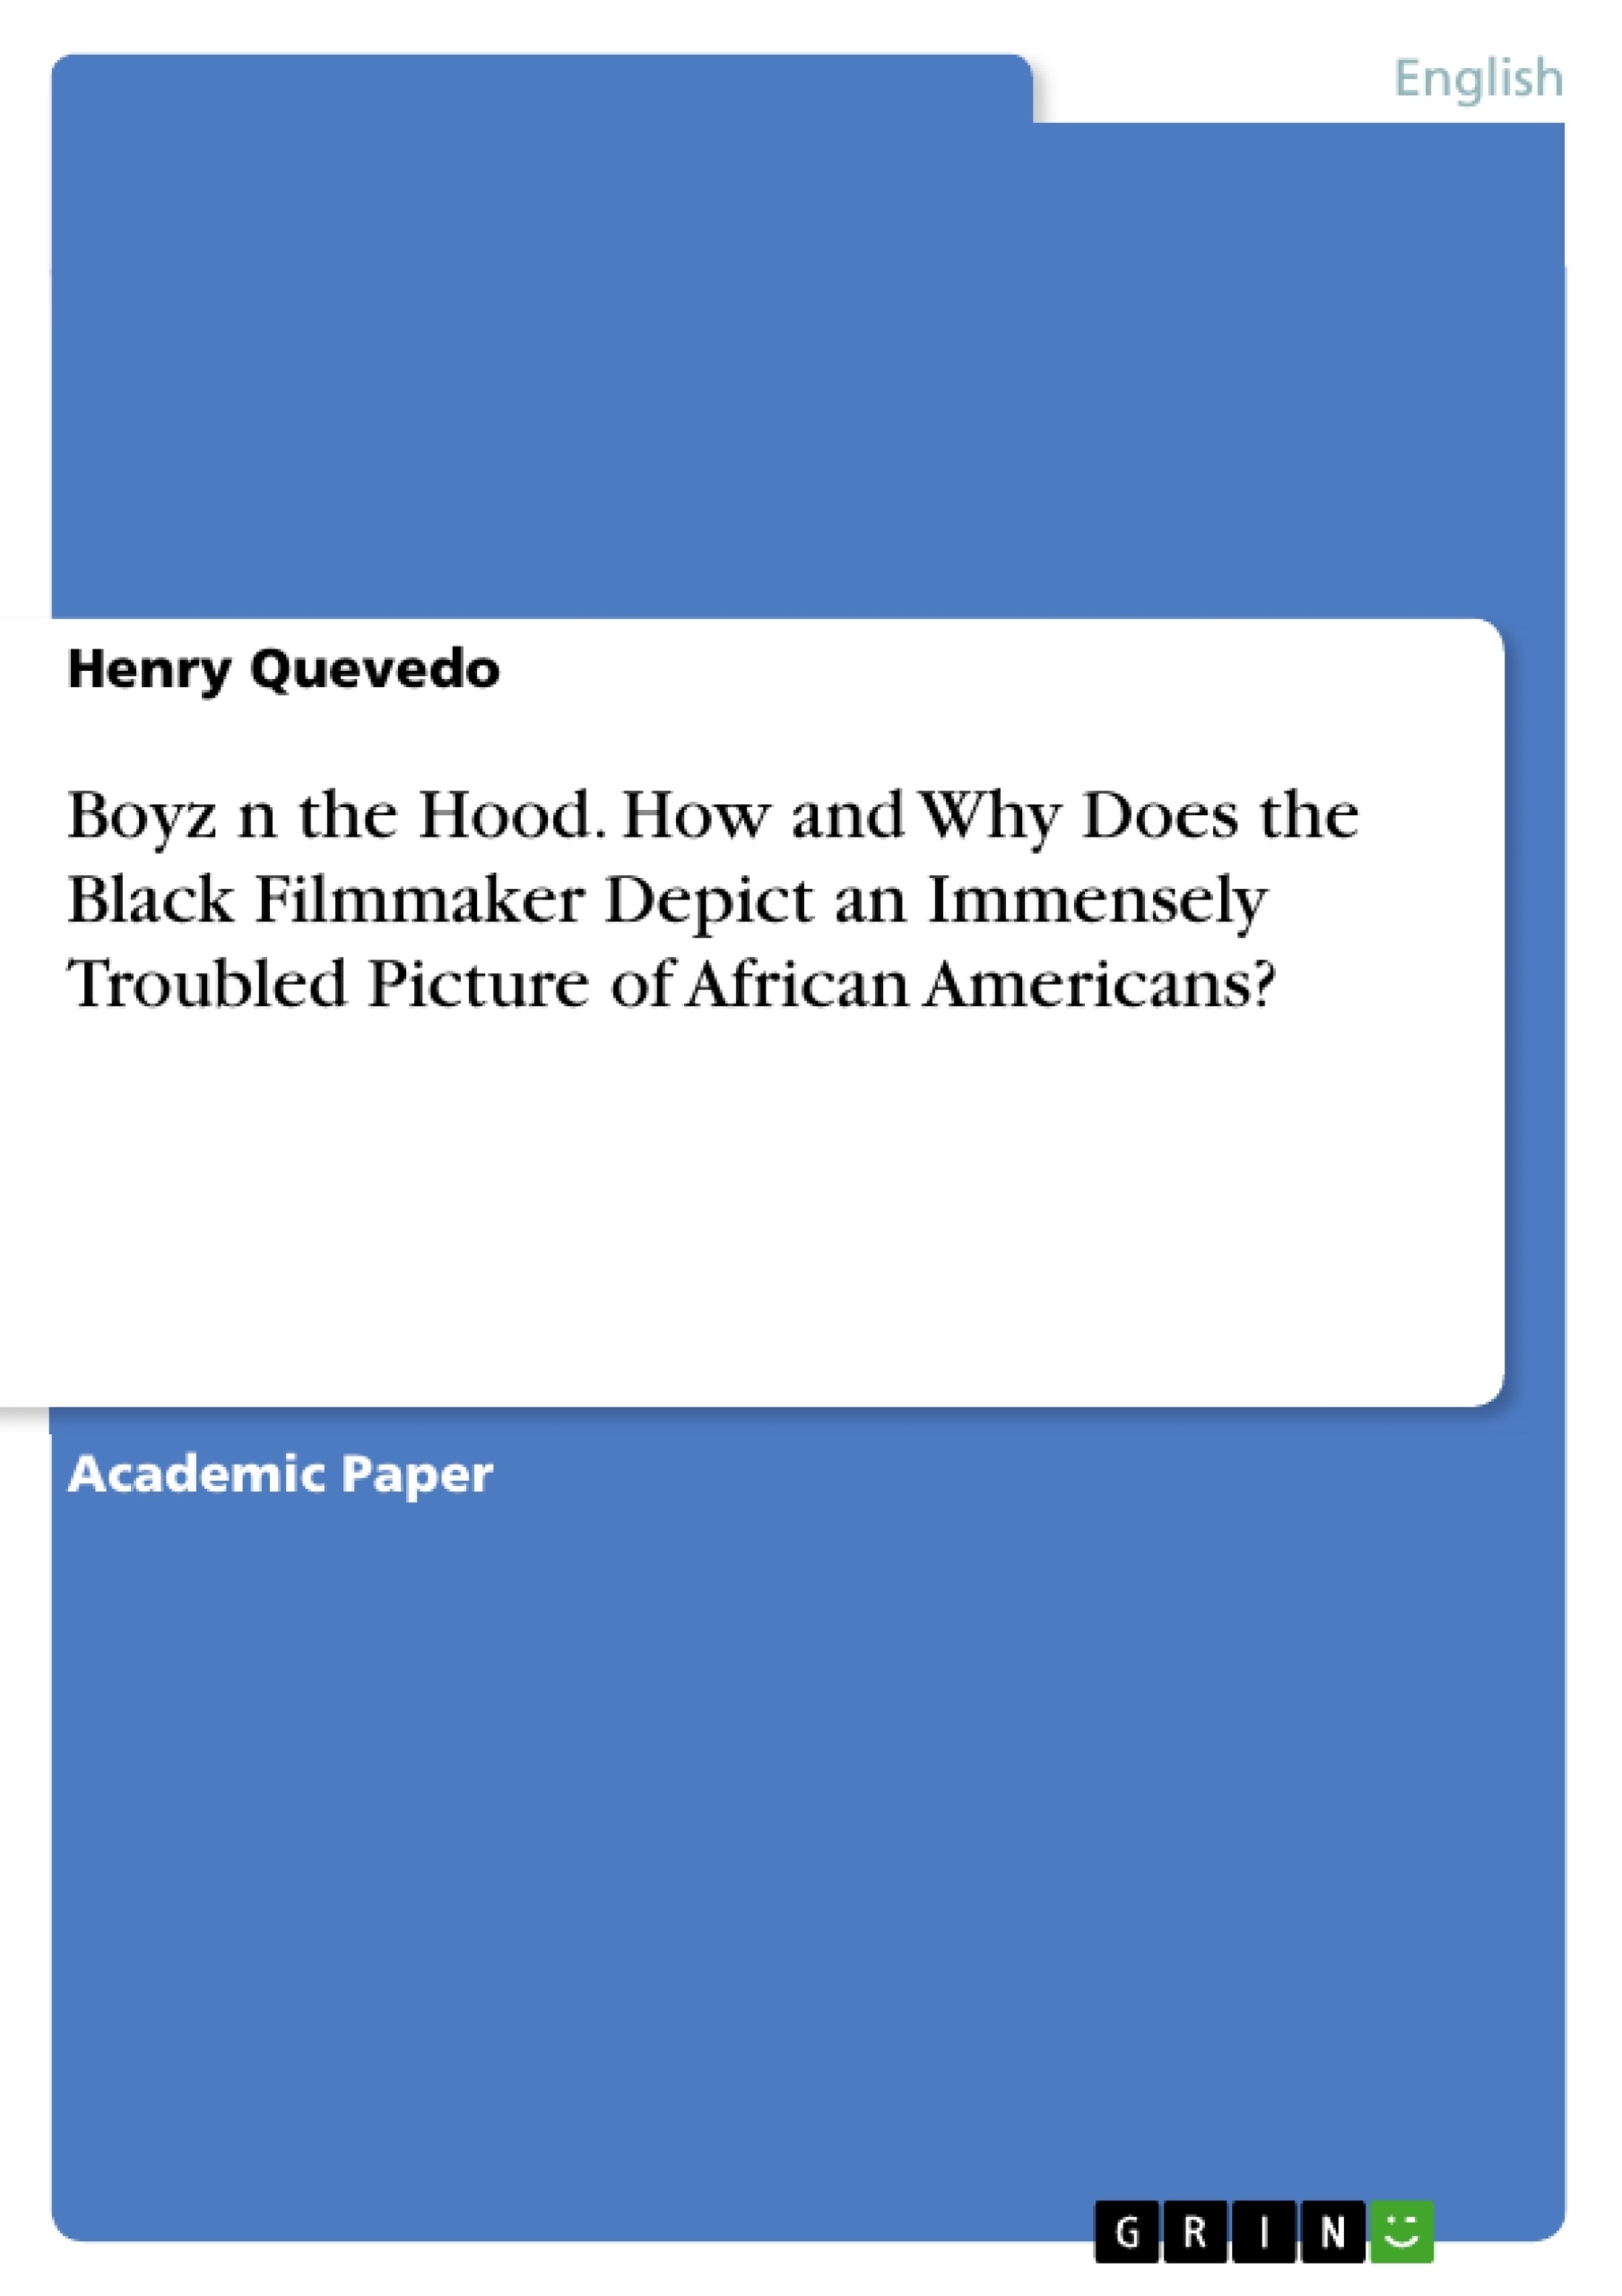 Title: Boyz n the Hood. How and Why Does the Black Filmmaker Depict an Immensely Troubled Picture of African Americans?